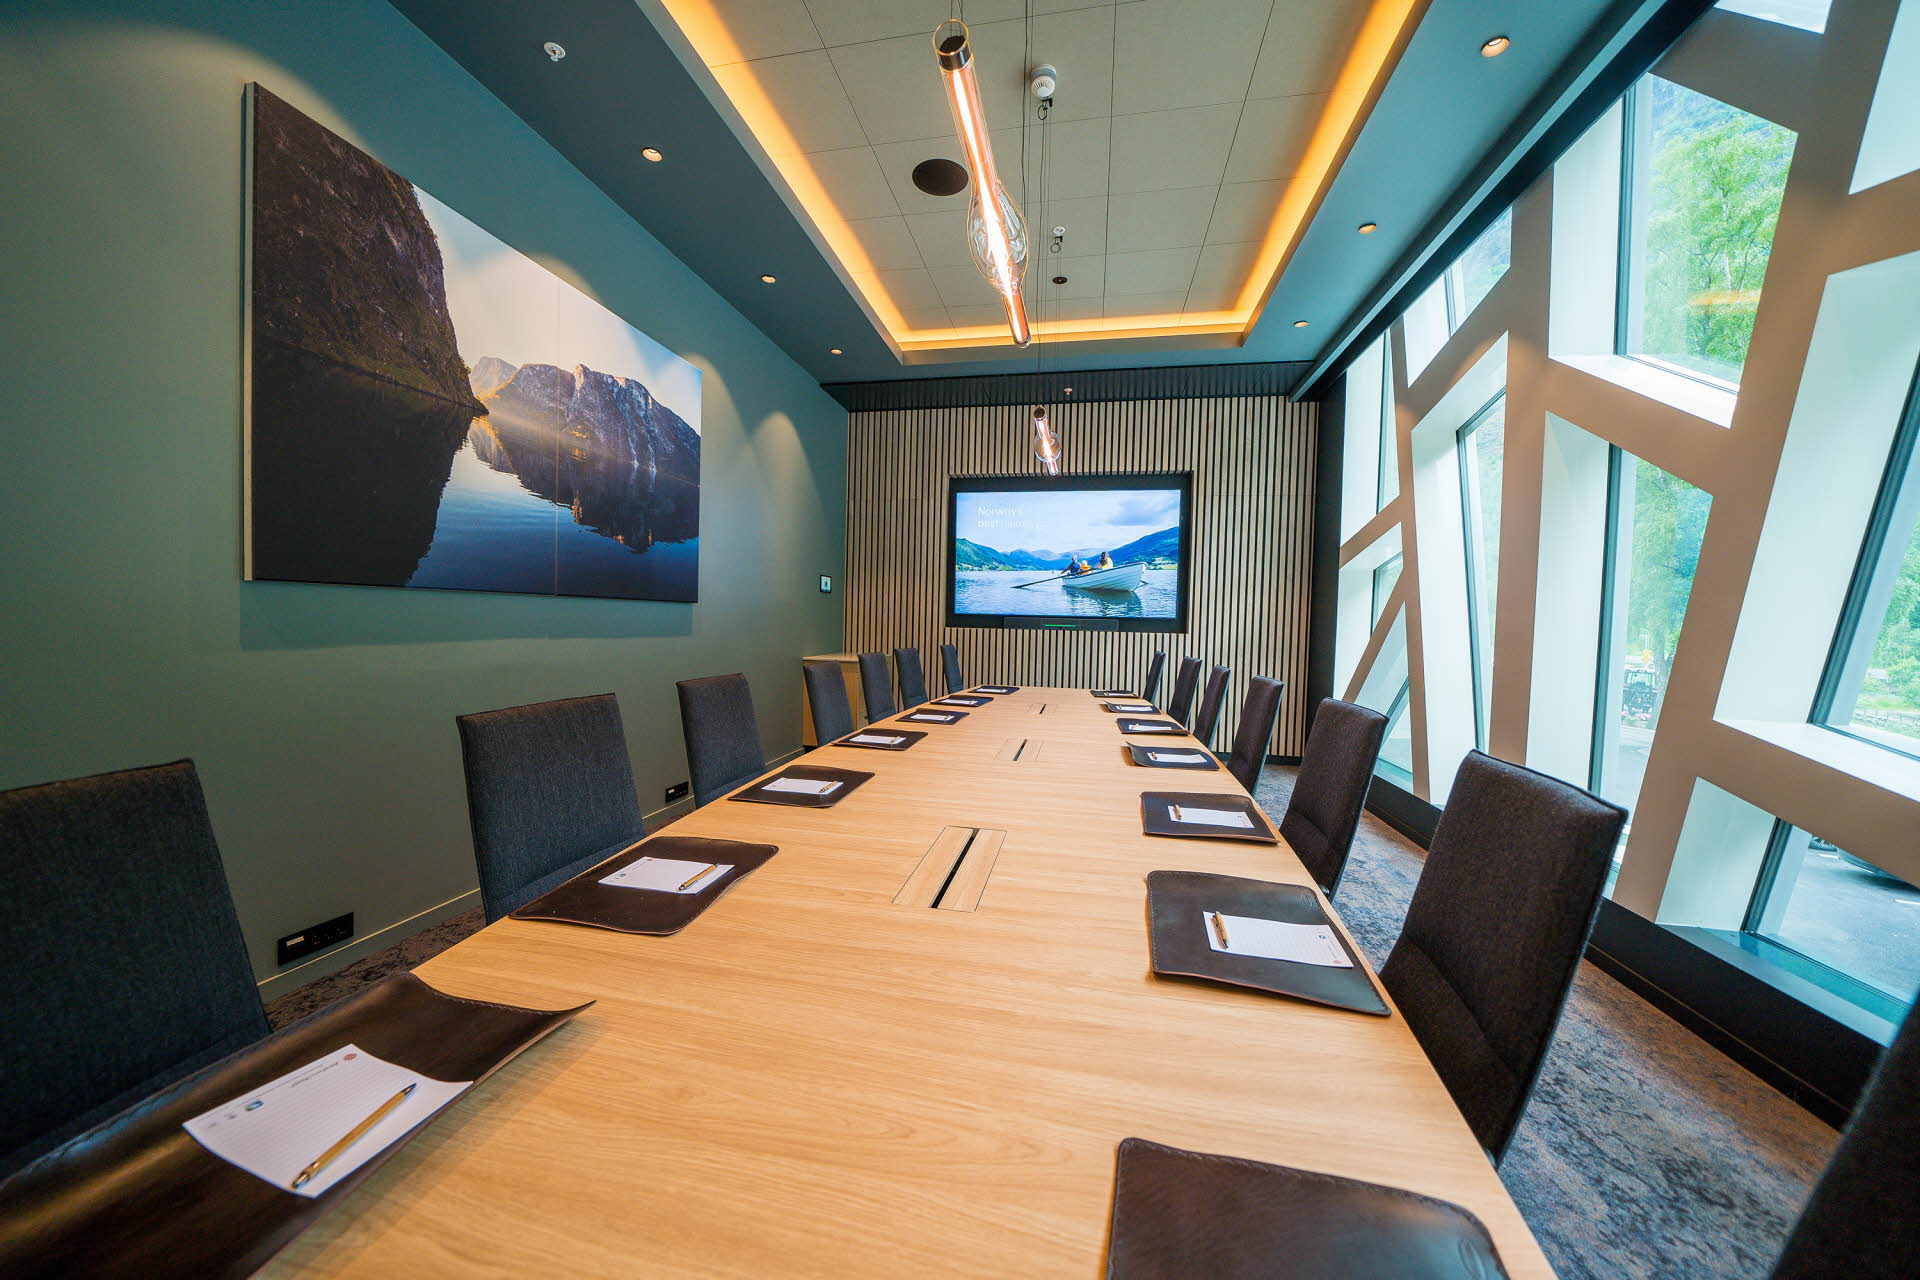 A meeting room with a long table and leather chairs. Large windows, picture and a screen on the walls. 